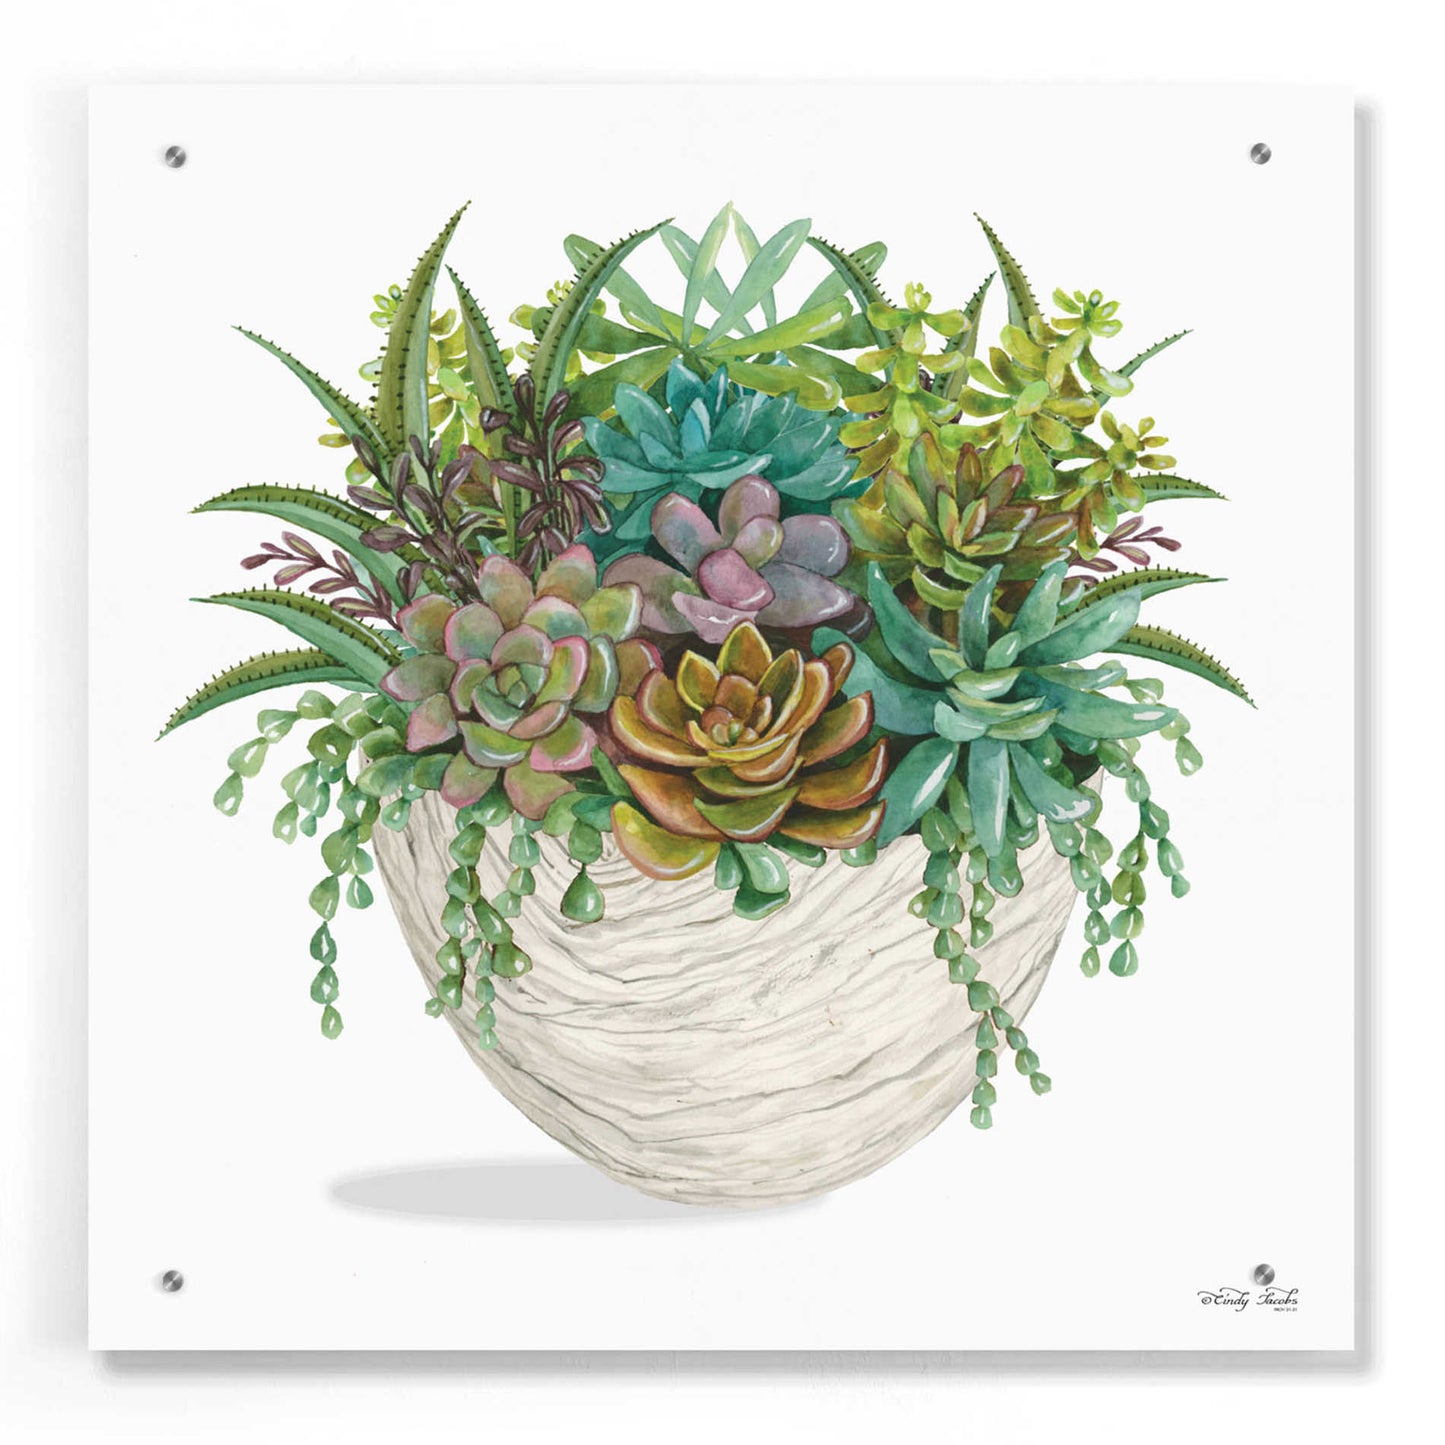 Epic Art 'White Wood Succulent II' by Cindy Jacobs, Acrylic Glass Wall Art,24x24